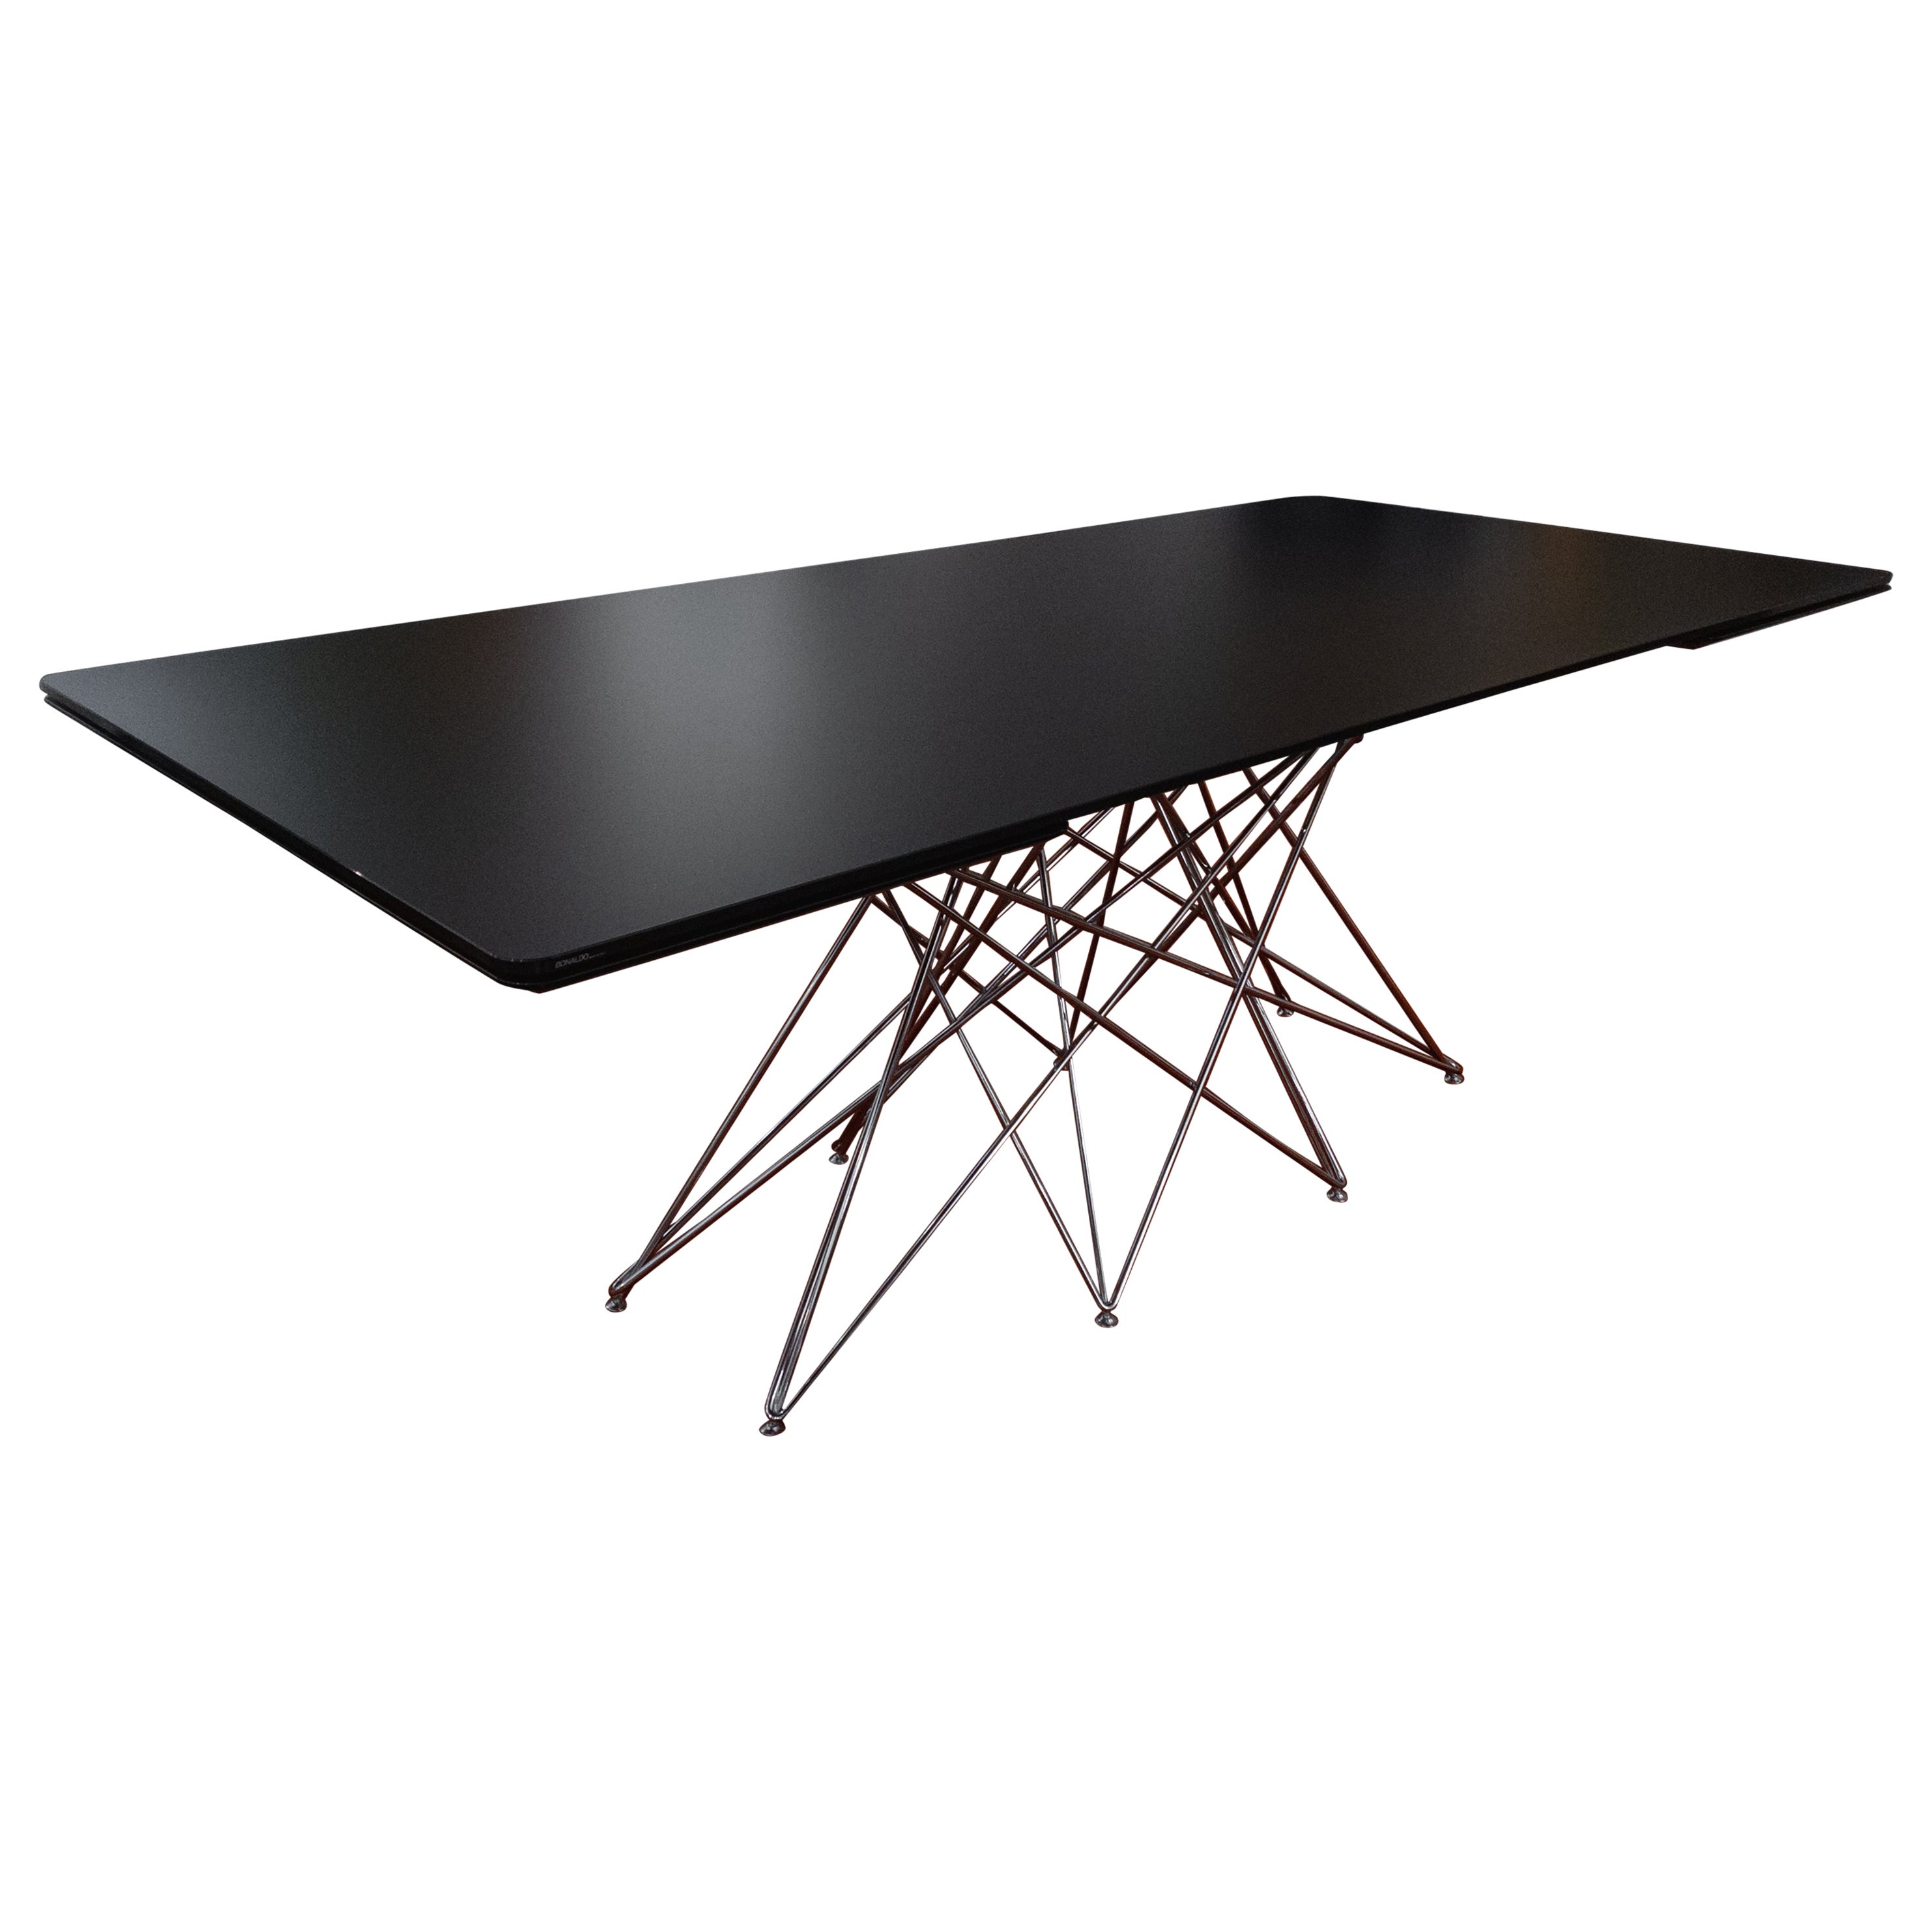 Italian Octa Smoked Glass Extension Dining Table with Chromed Metal Base